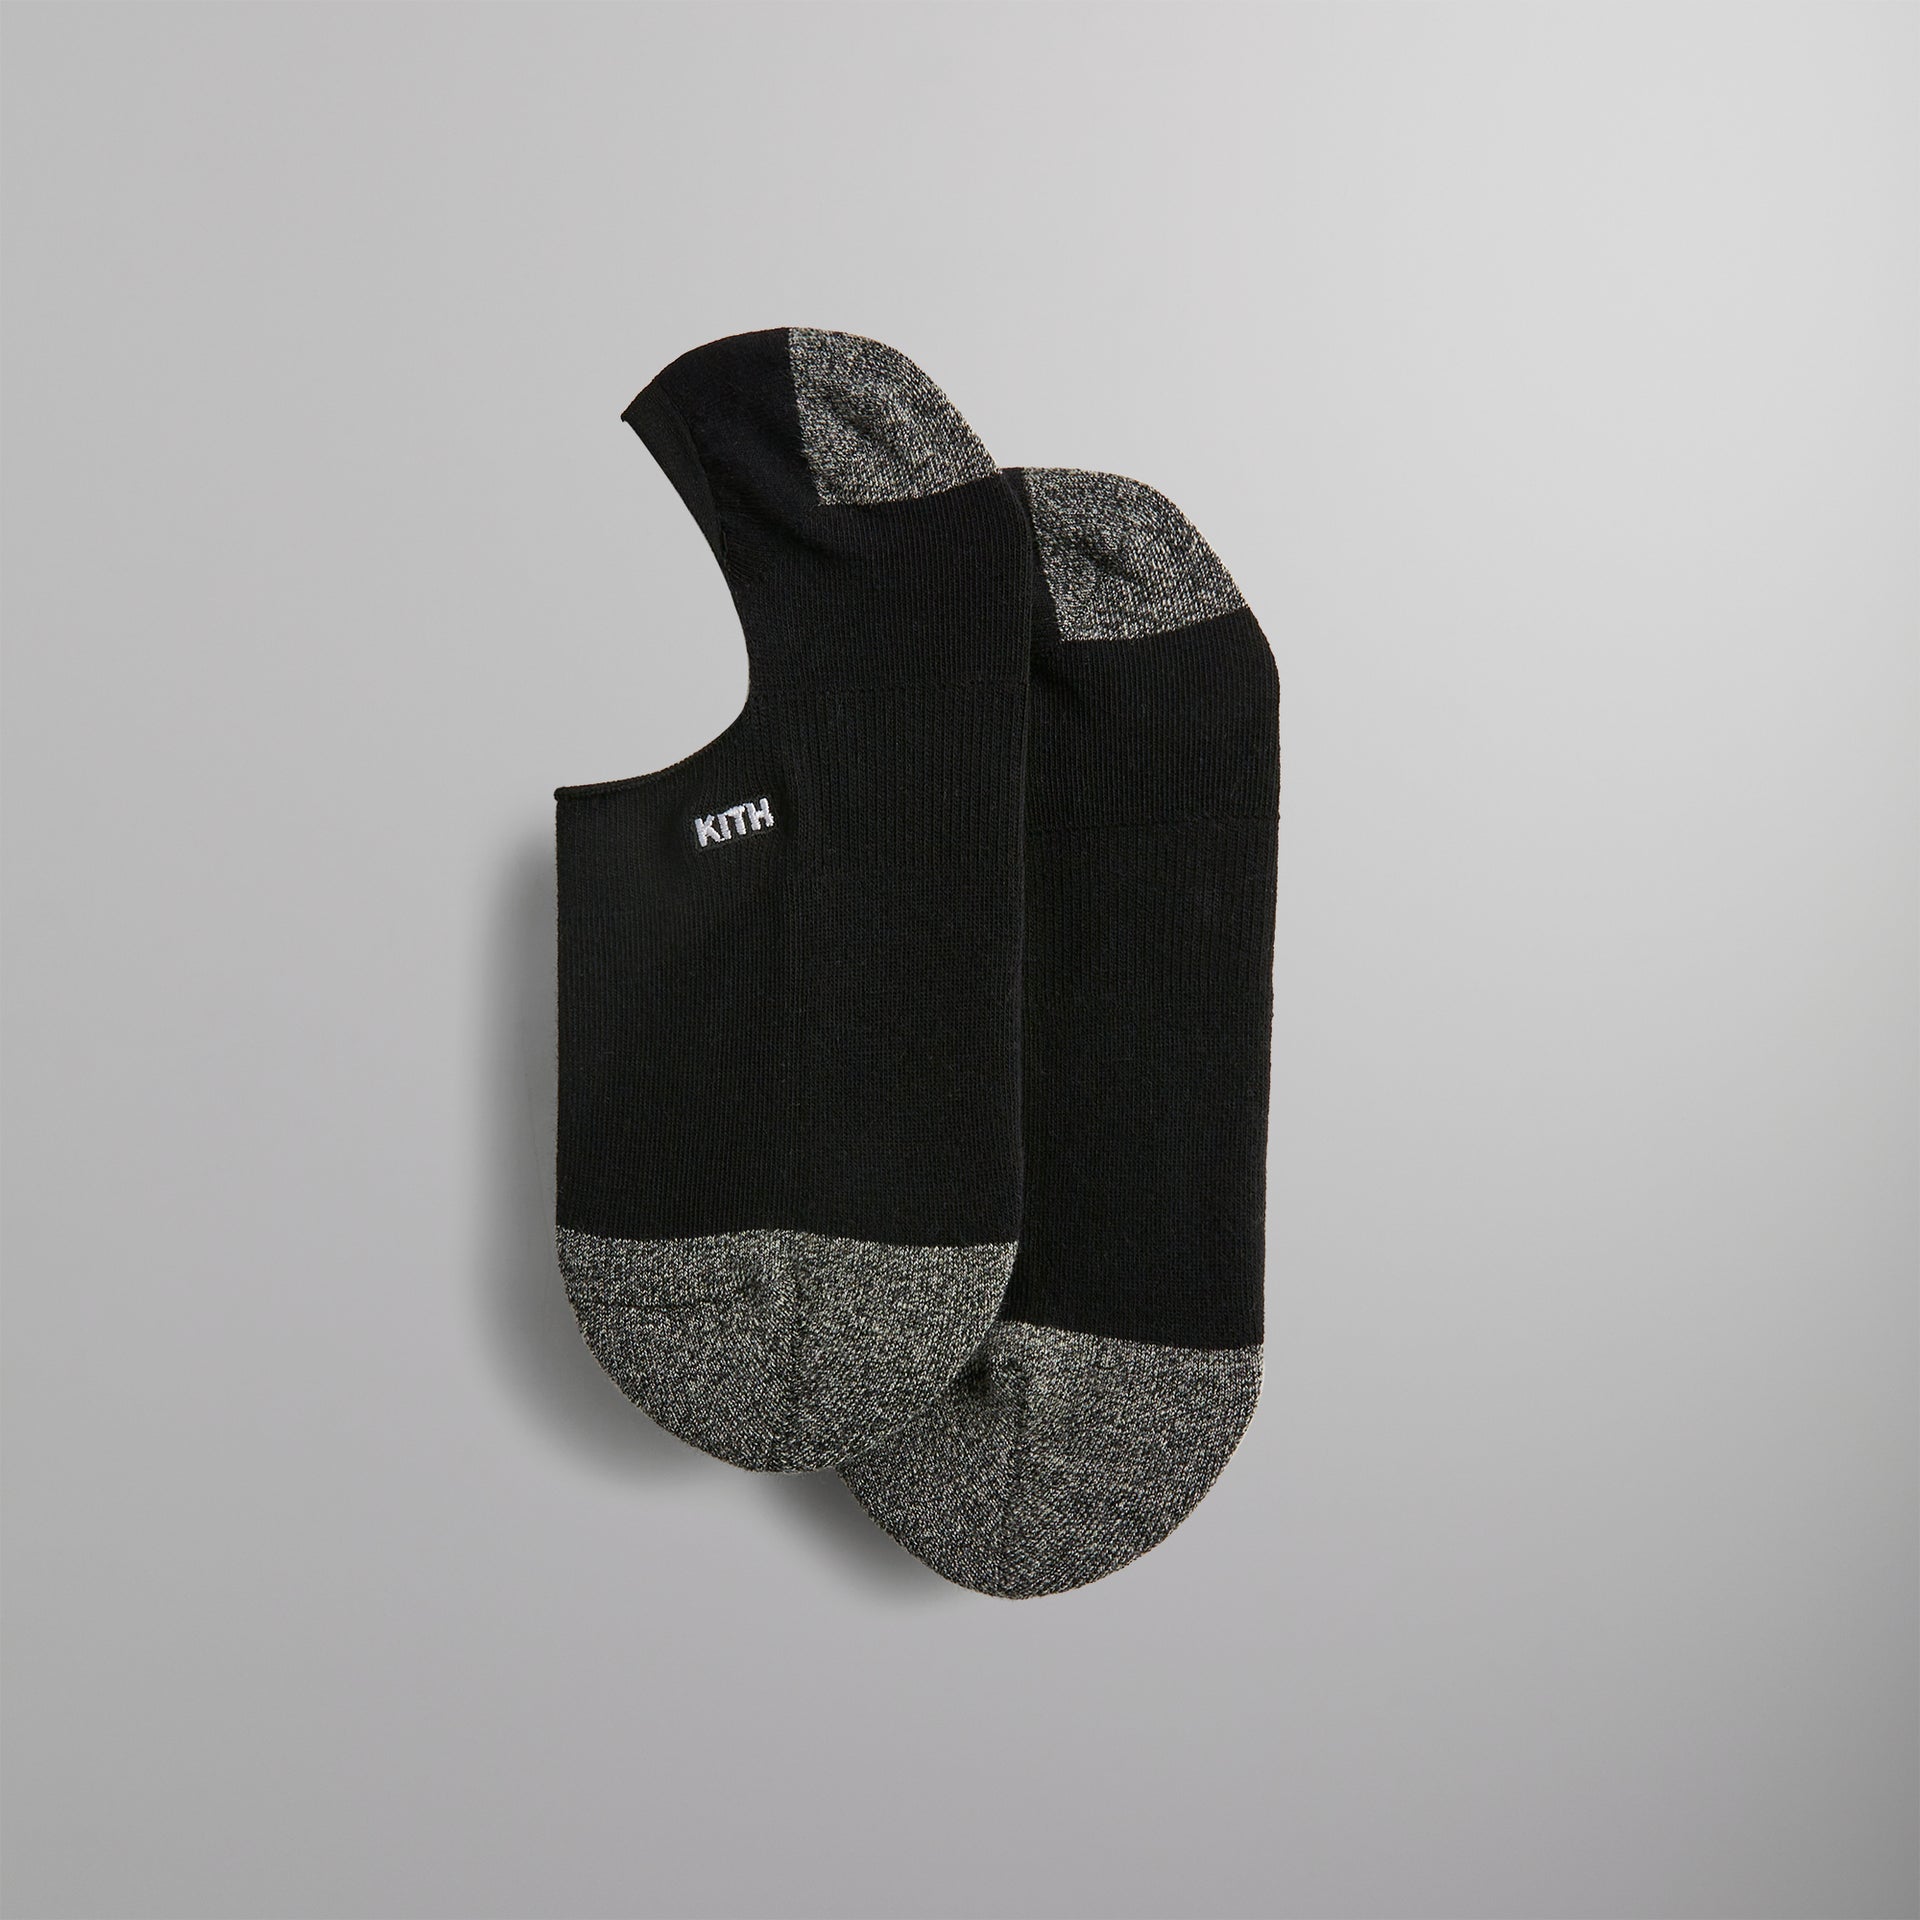 Kith for Stance Classic Super Invisible Sock - Black